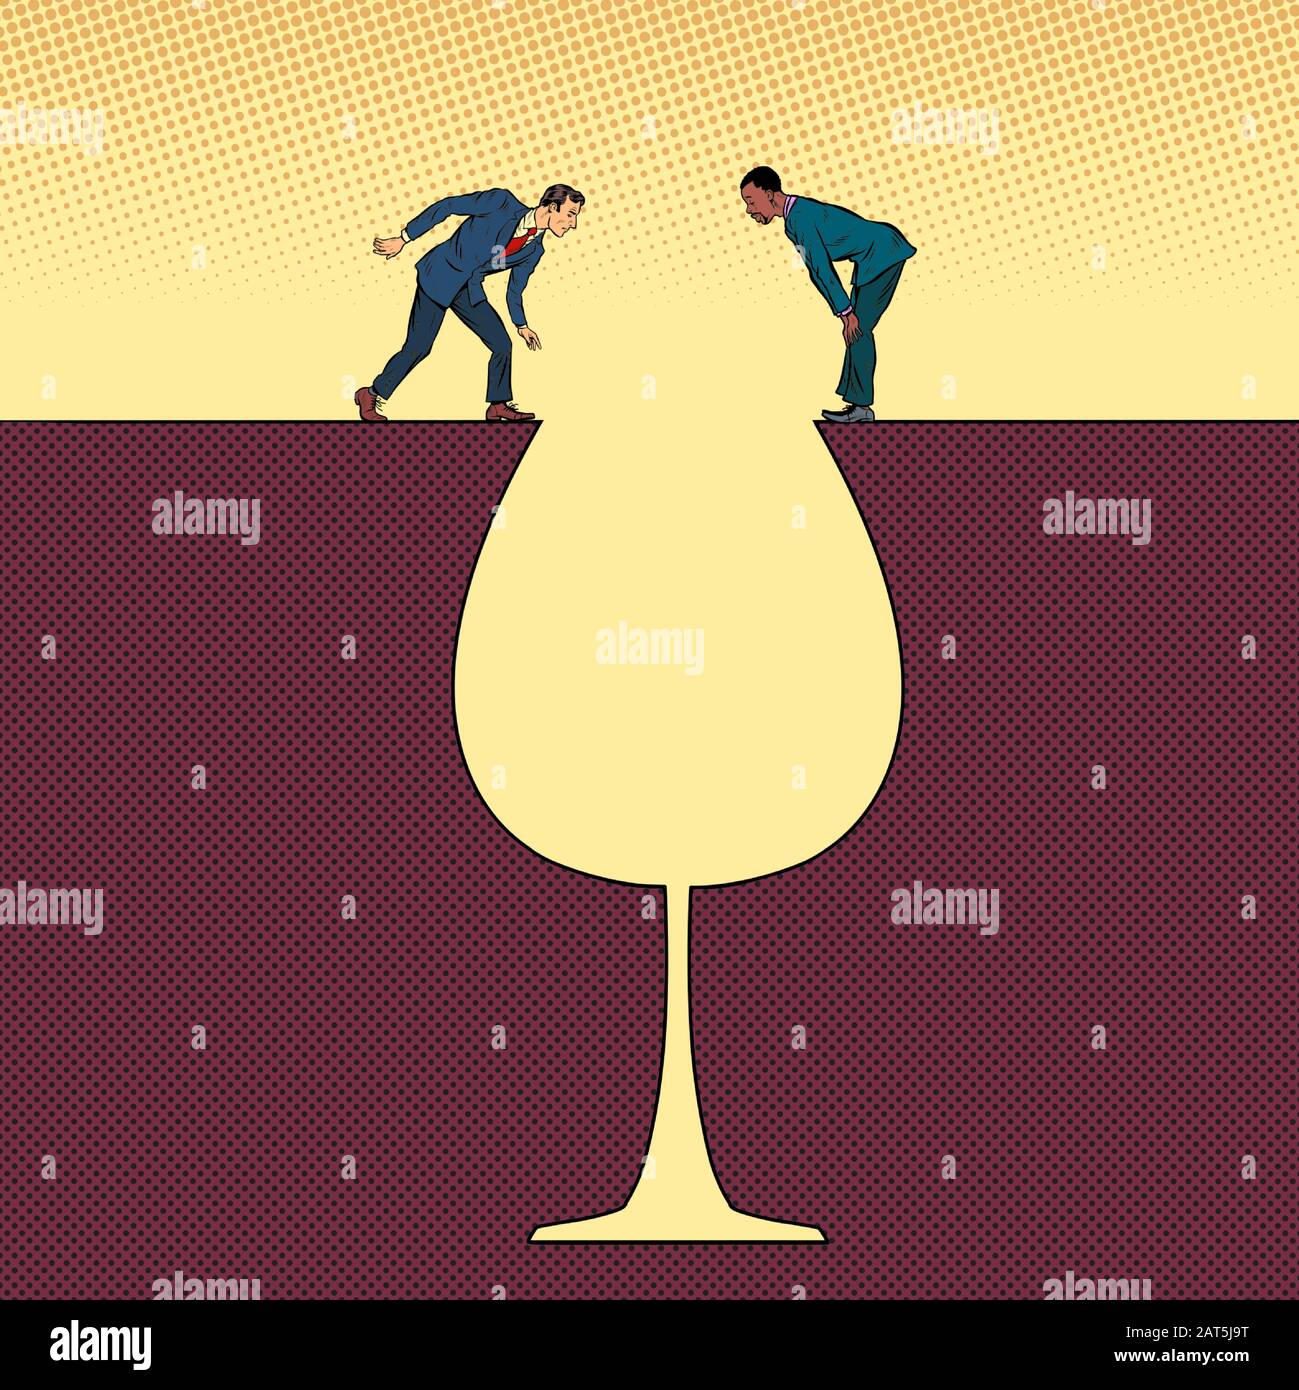 A glass of wine and alcoholics Stock Vector